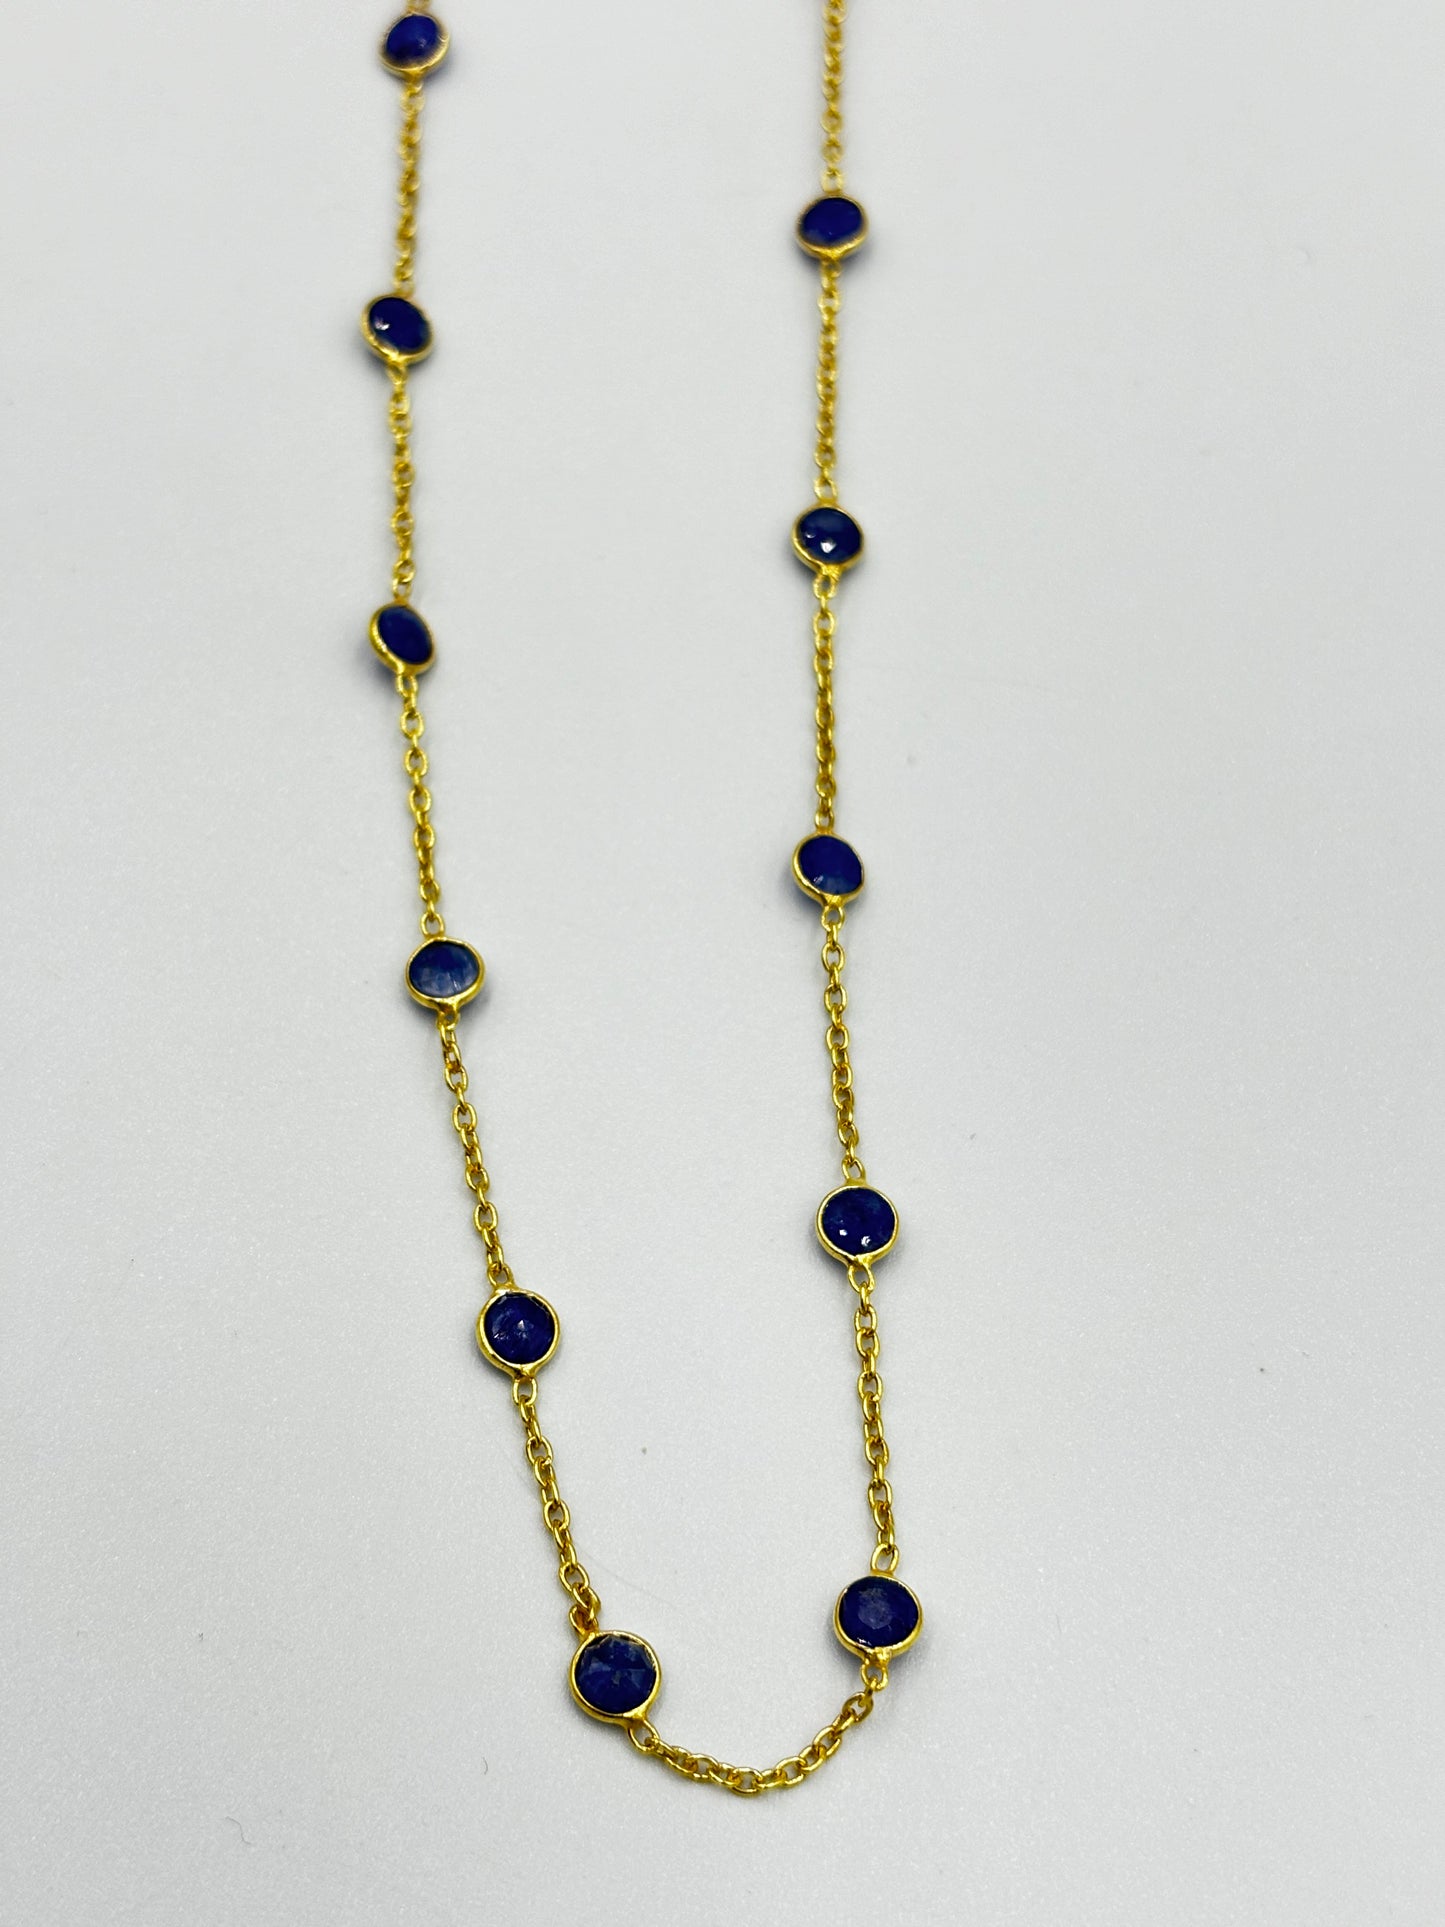 Stunning gold necklace with blue semi precious stones in chain setting